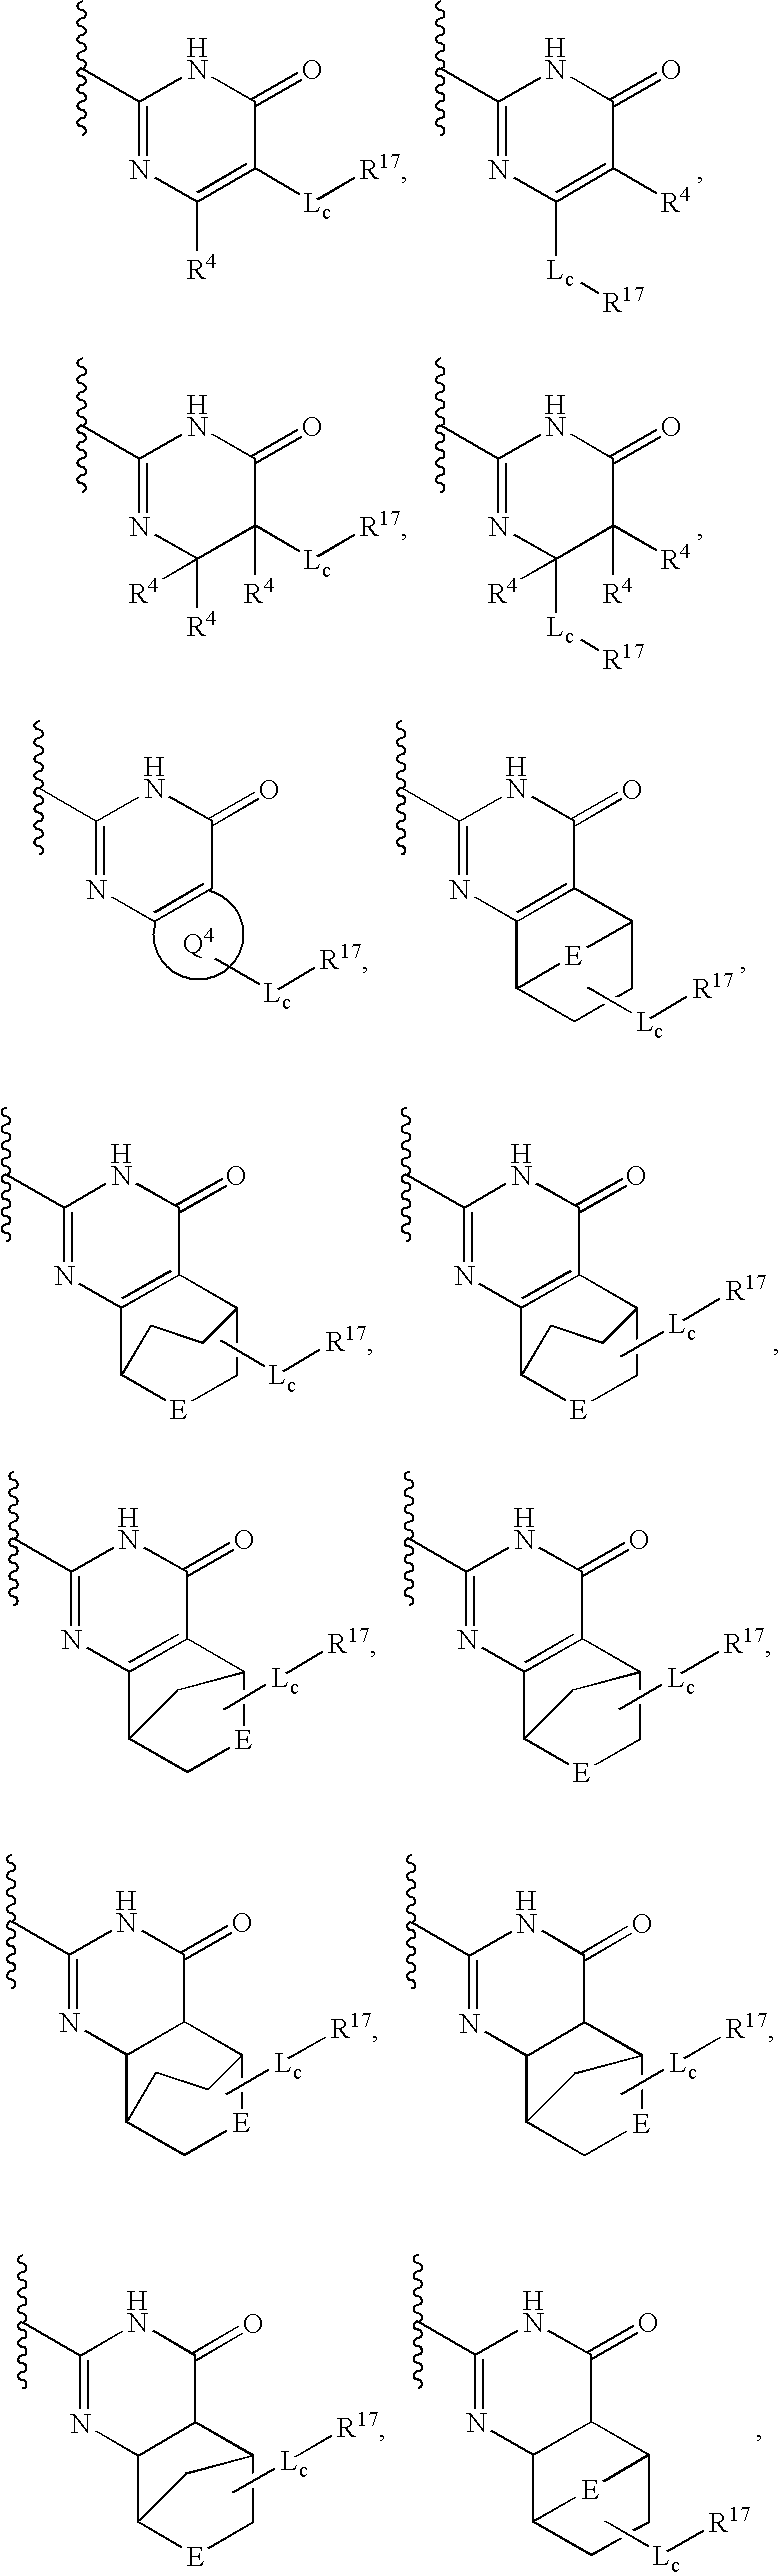 Metalloprotease inhibitors containing a heterocyclic moiety